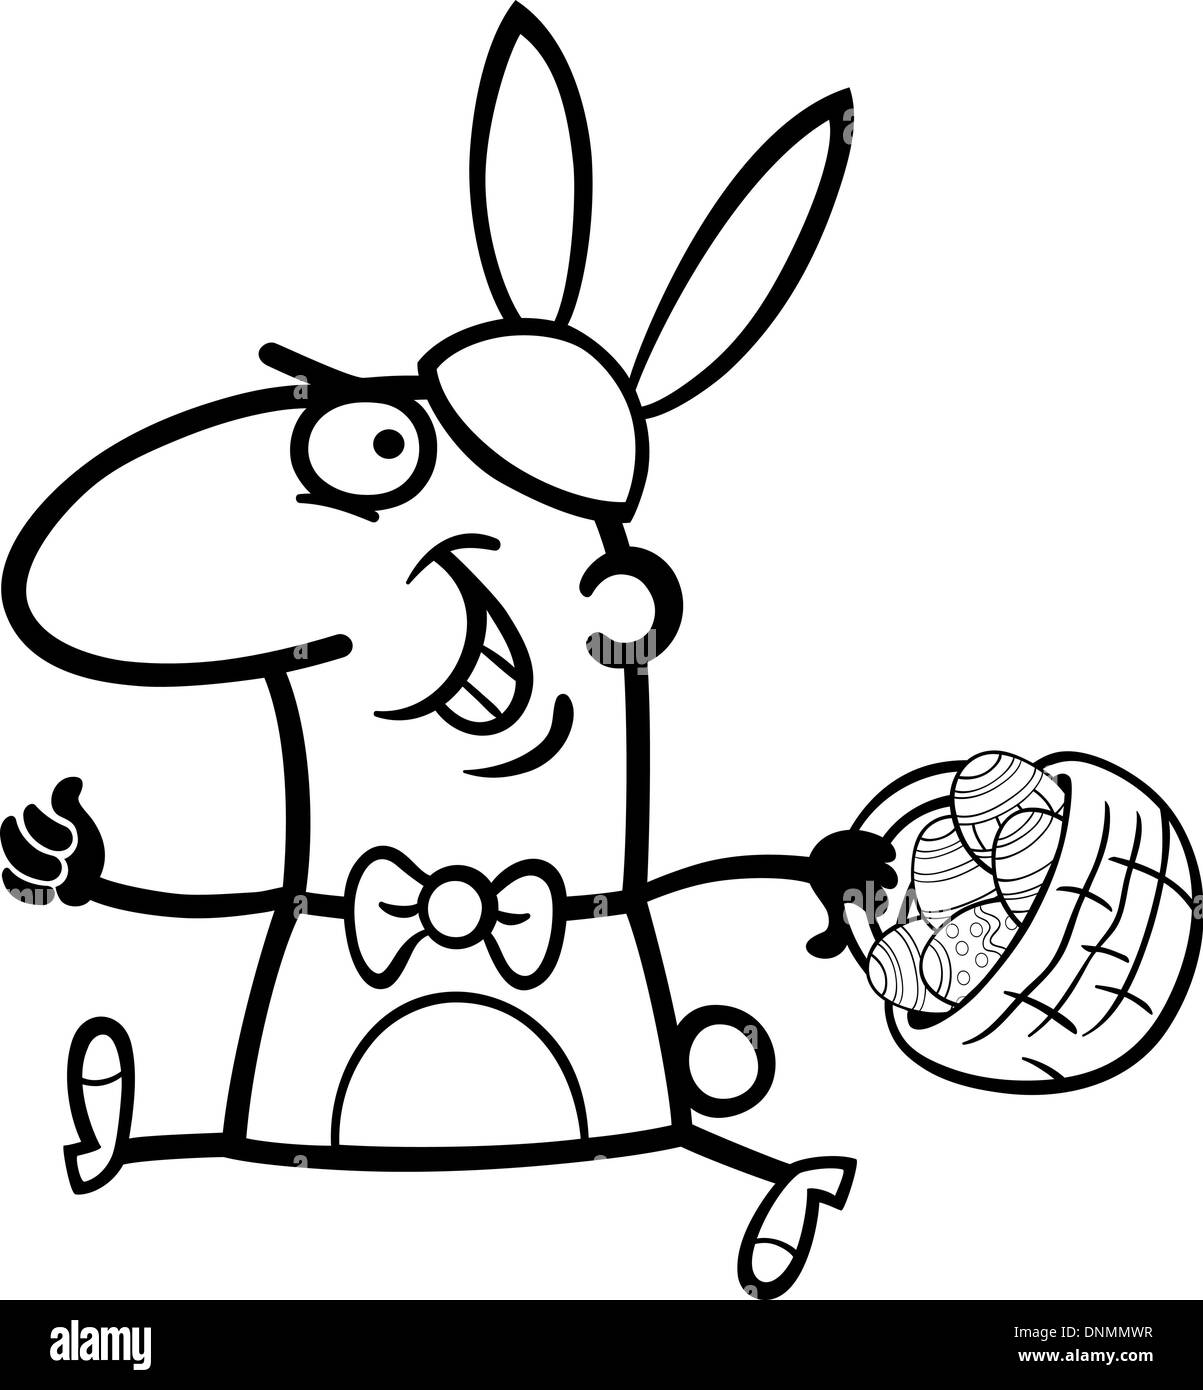 Black and White Cartoon Illustration of Funny Man in Easter Bunny Costume running with Easter Eggs in a Basket for Coloring Book Stock Vector